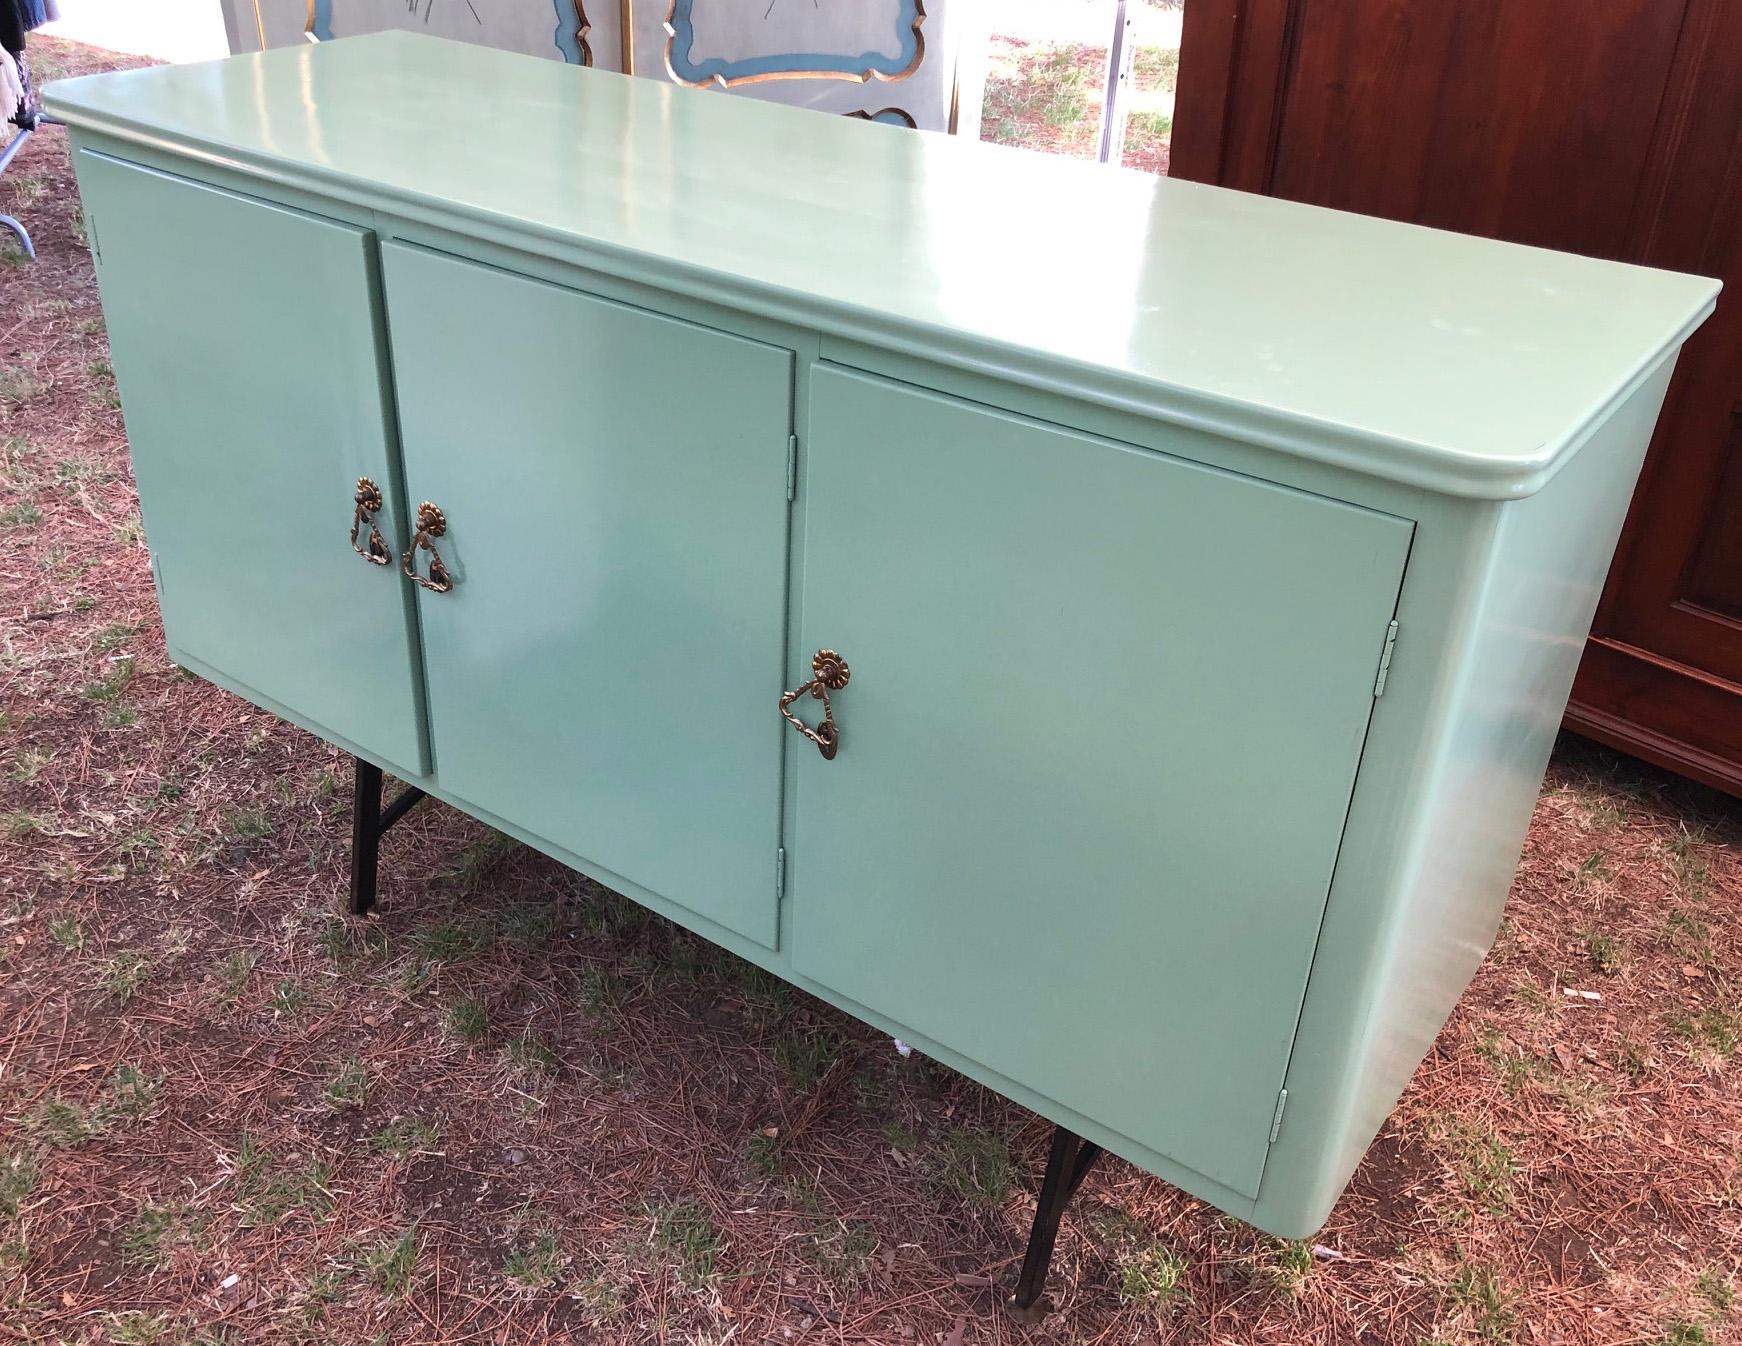 20th century green Italian sideboard, with three doors. 
The total height of the cupboard is 101 cm. while at the legs it is 33 cm.
It is a very useful piece of furniture in the kitchen and living room, it could very well contain your bar.
The